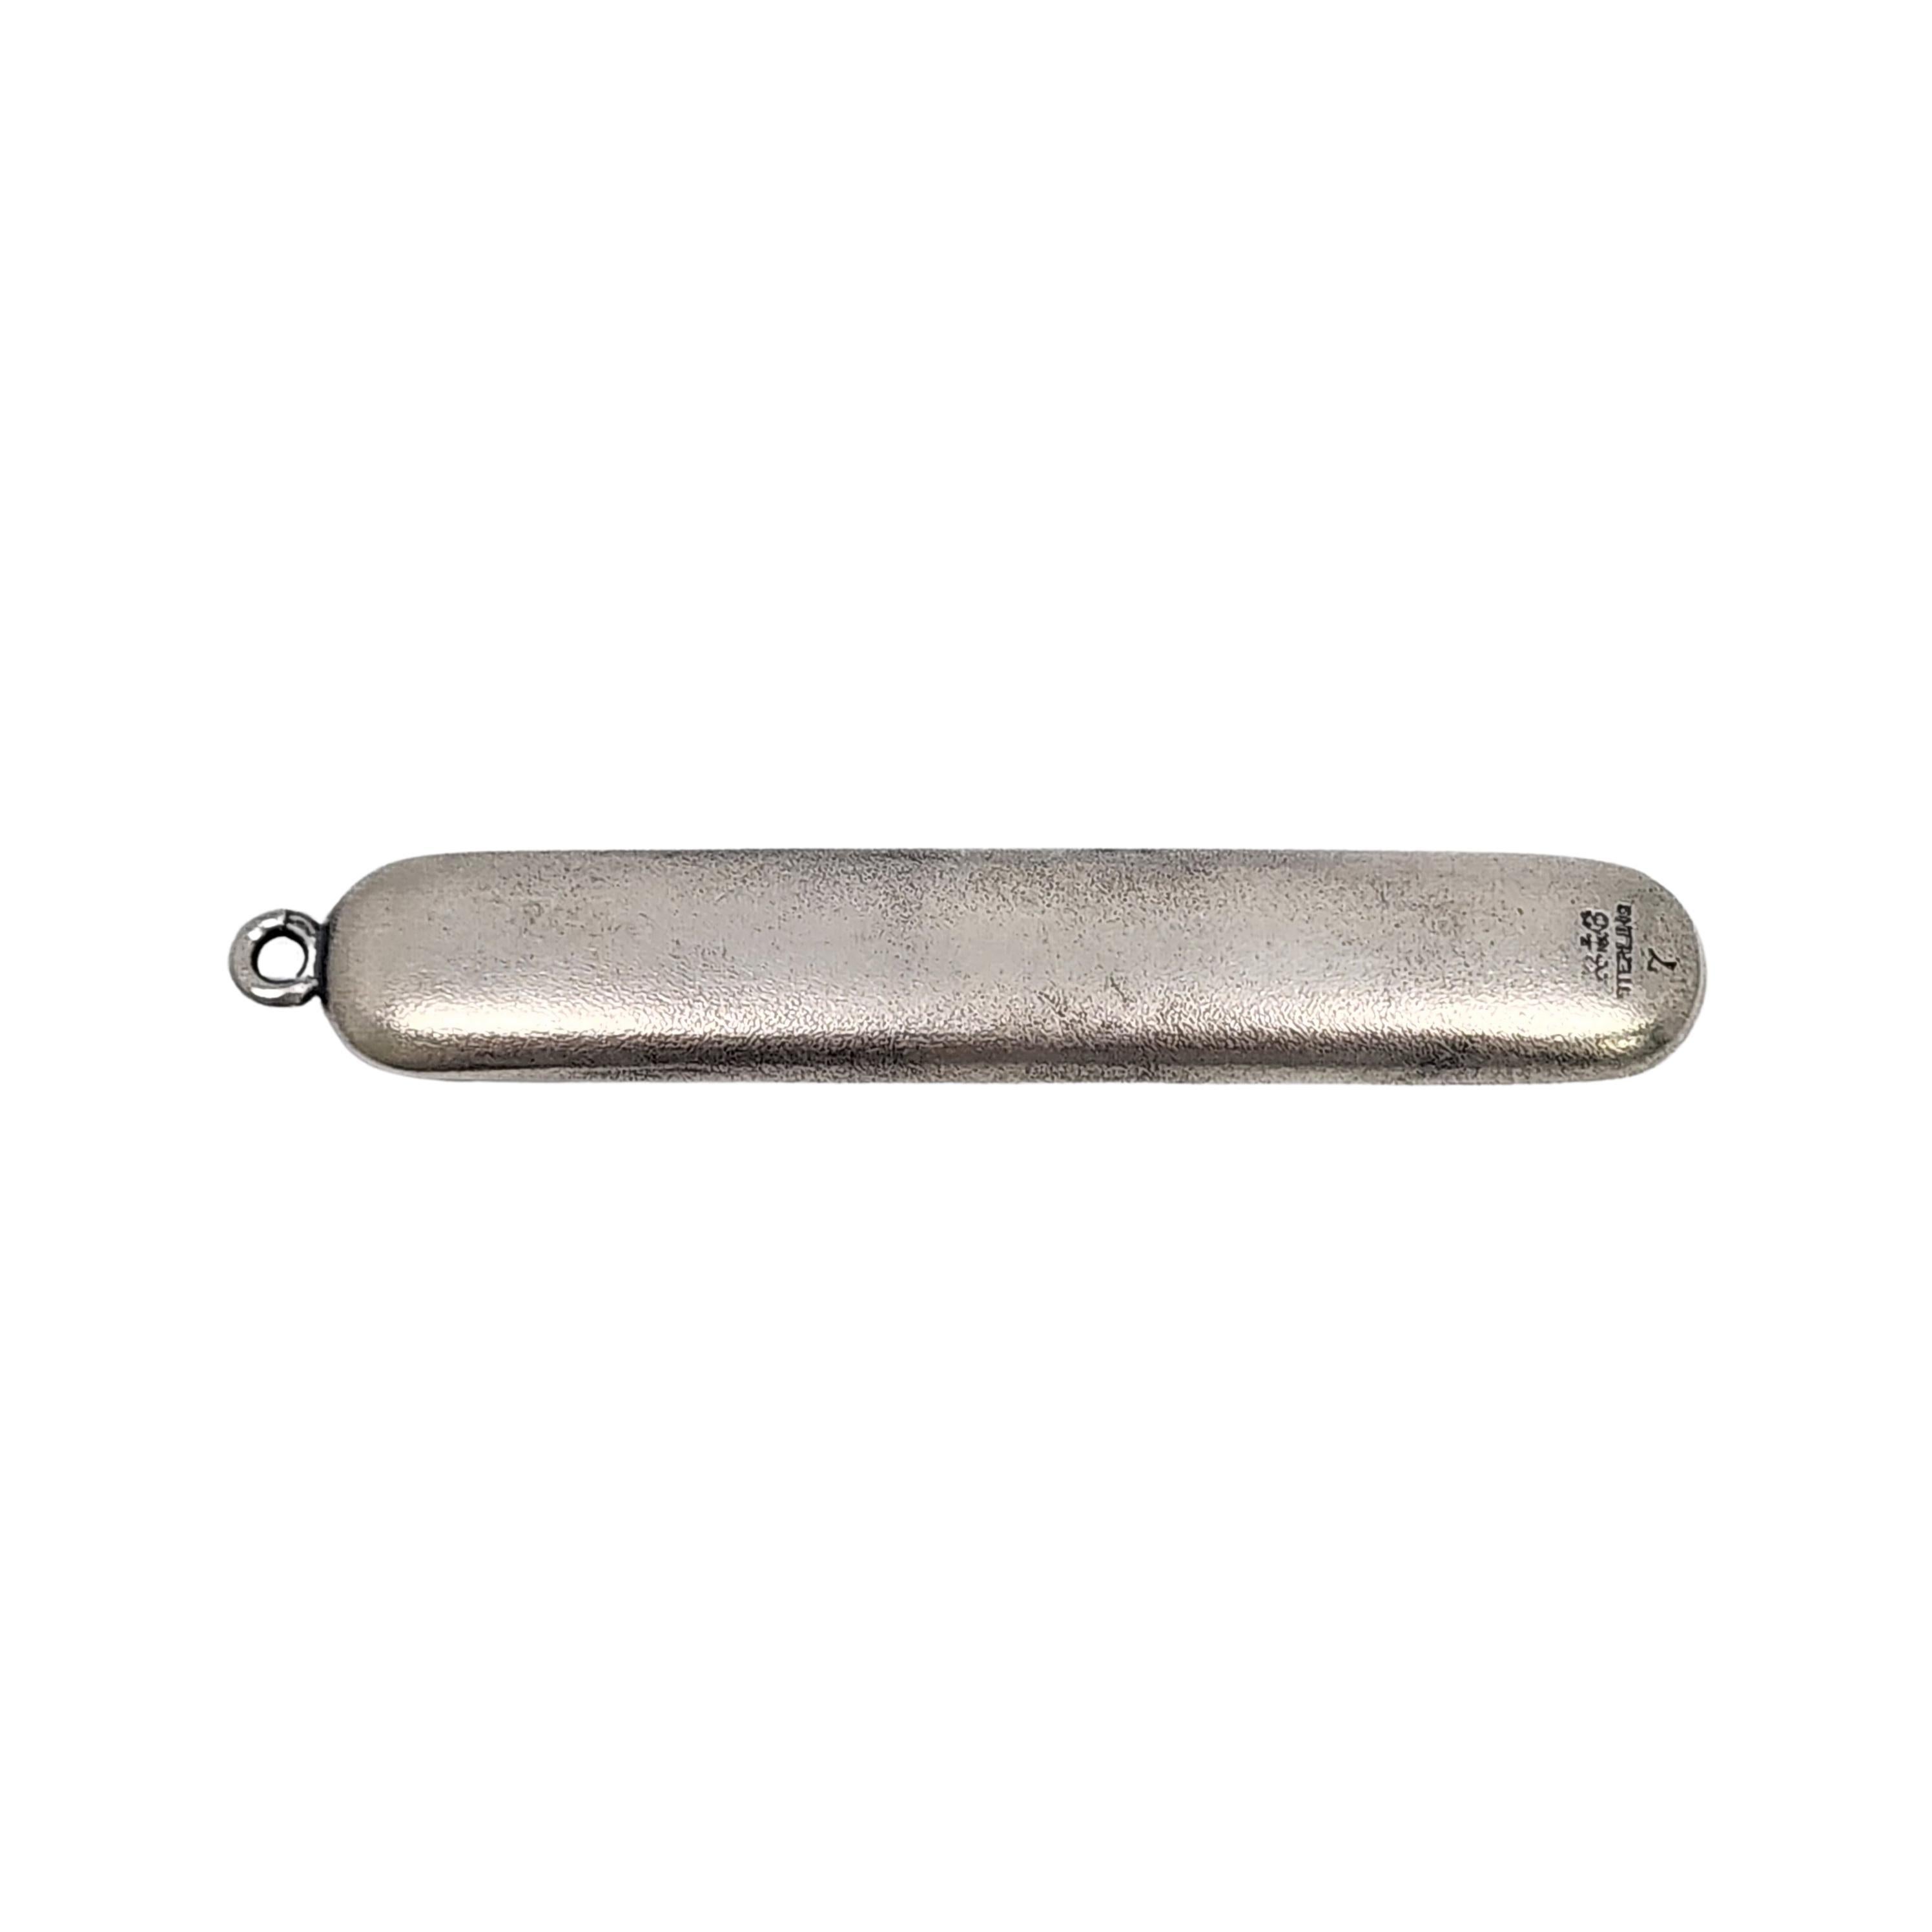 Antique sterling silver chatelaine sewing needle case by Gorham.

Monogram appears to be MCN.

A simple sewing case with a rounded square opening and small round loop to wear on a chatelaine or chain. Monogram is engraved on one side.

Measures